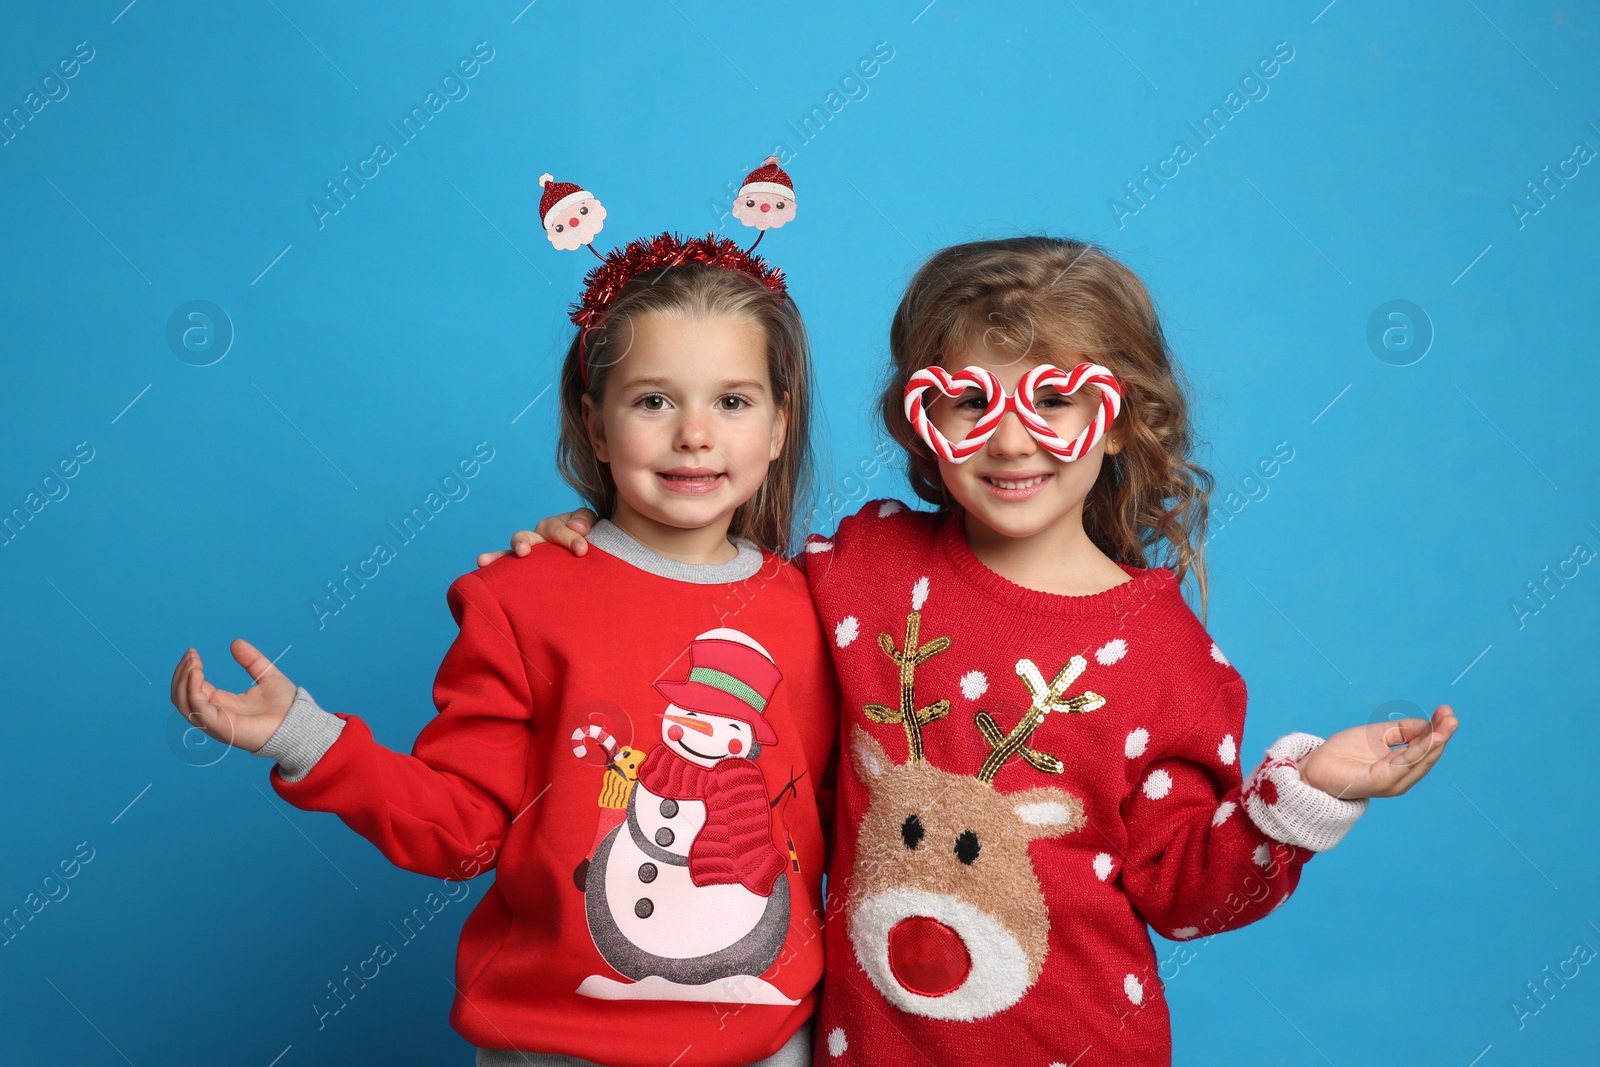 Photo of Kids in Christmas sweaters and festive accessories on blue background